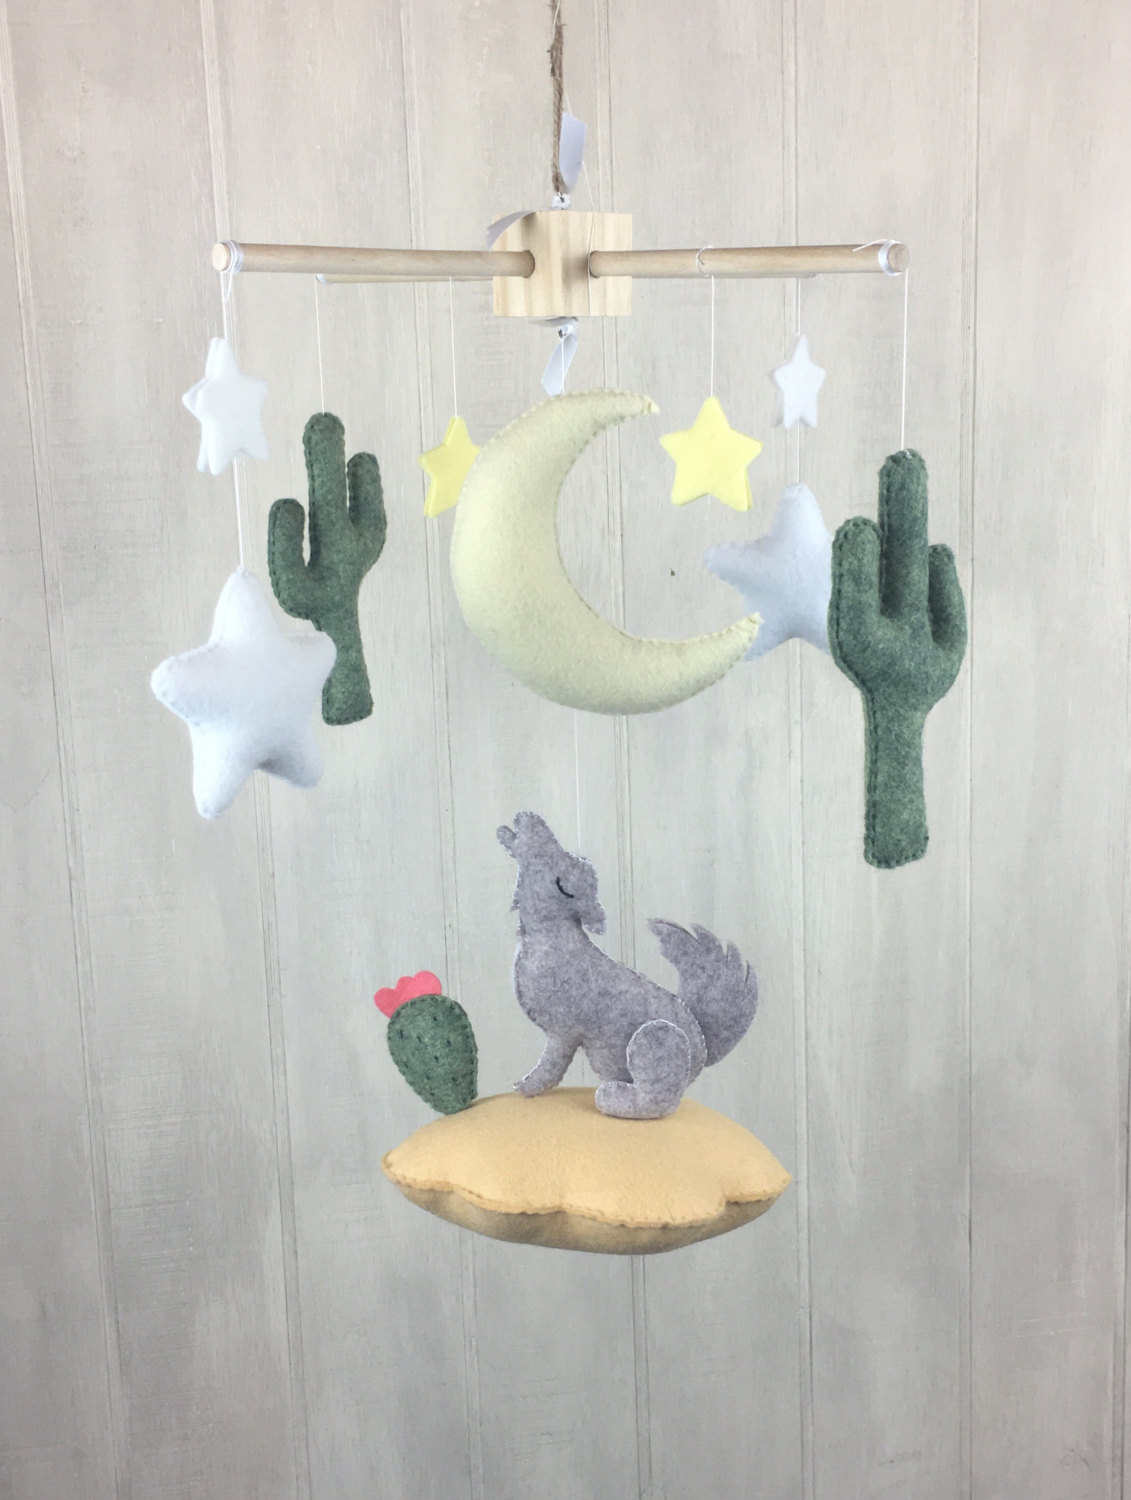 Cactus Baby Mobile from Juniper Street Designs on Etsy